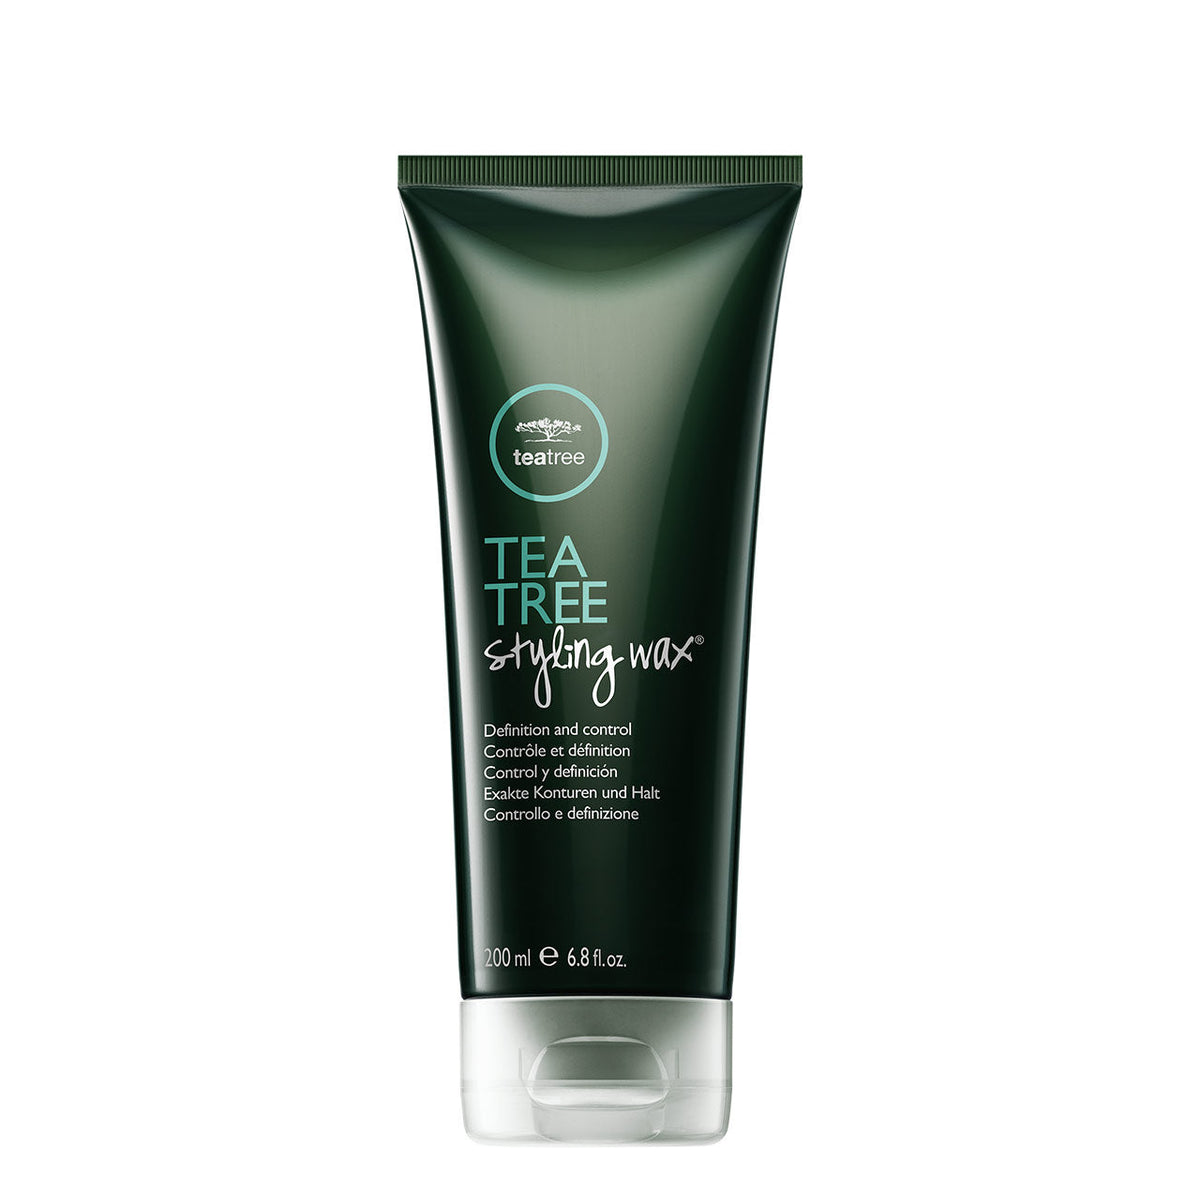 Tea Tree Styling Wax - 200ML - by Paul Mitchell |ProCare Outlet|